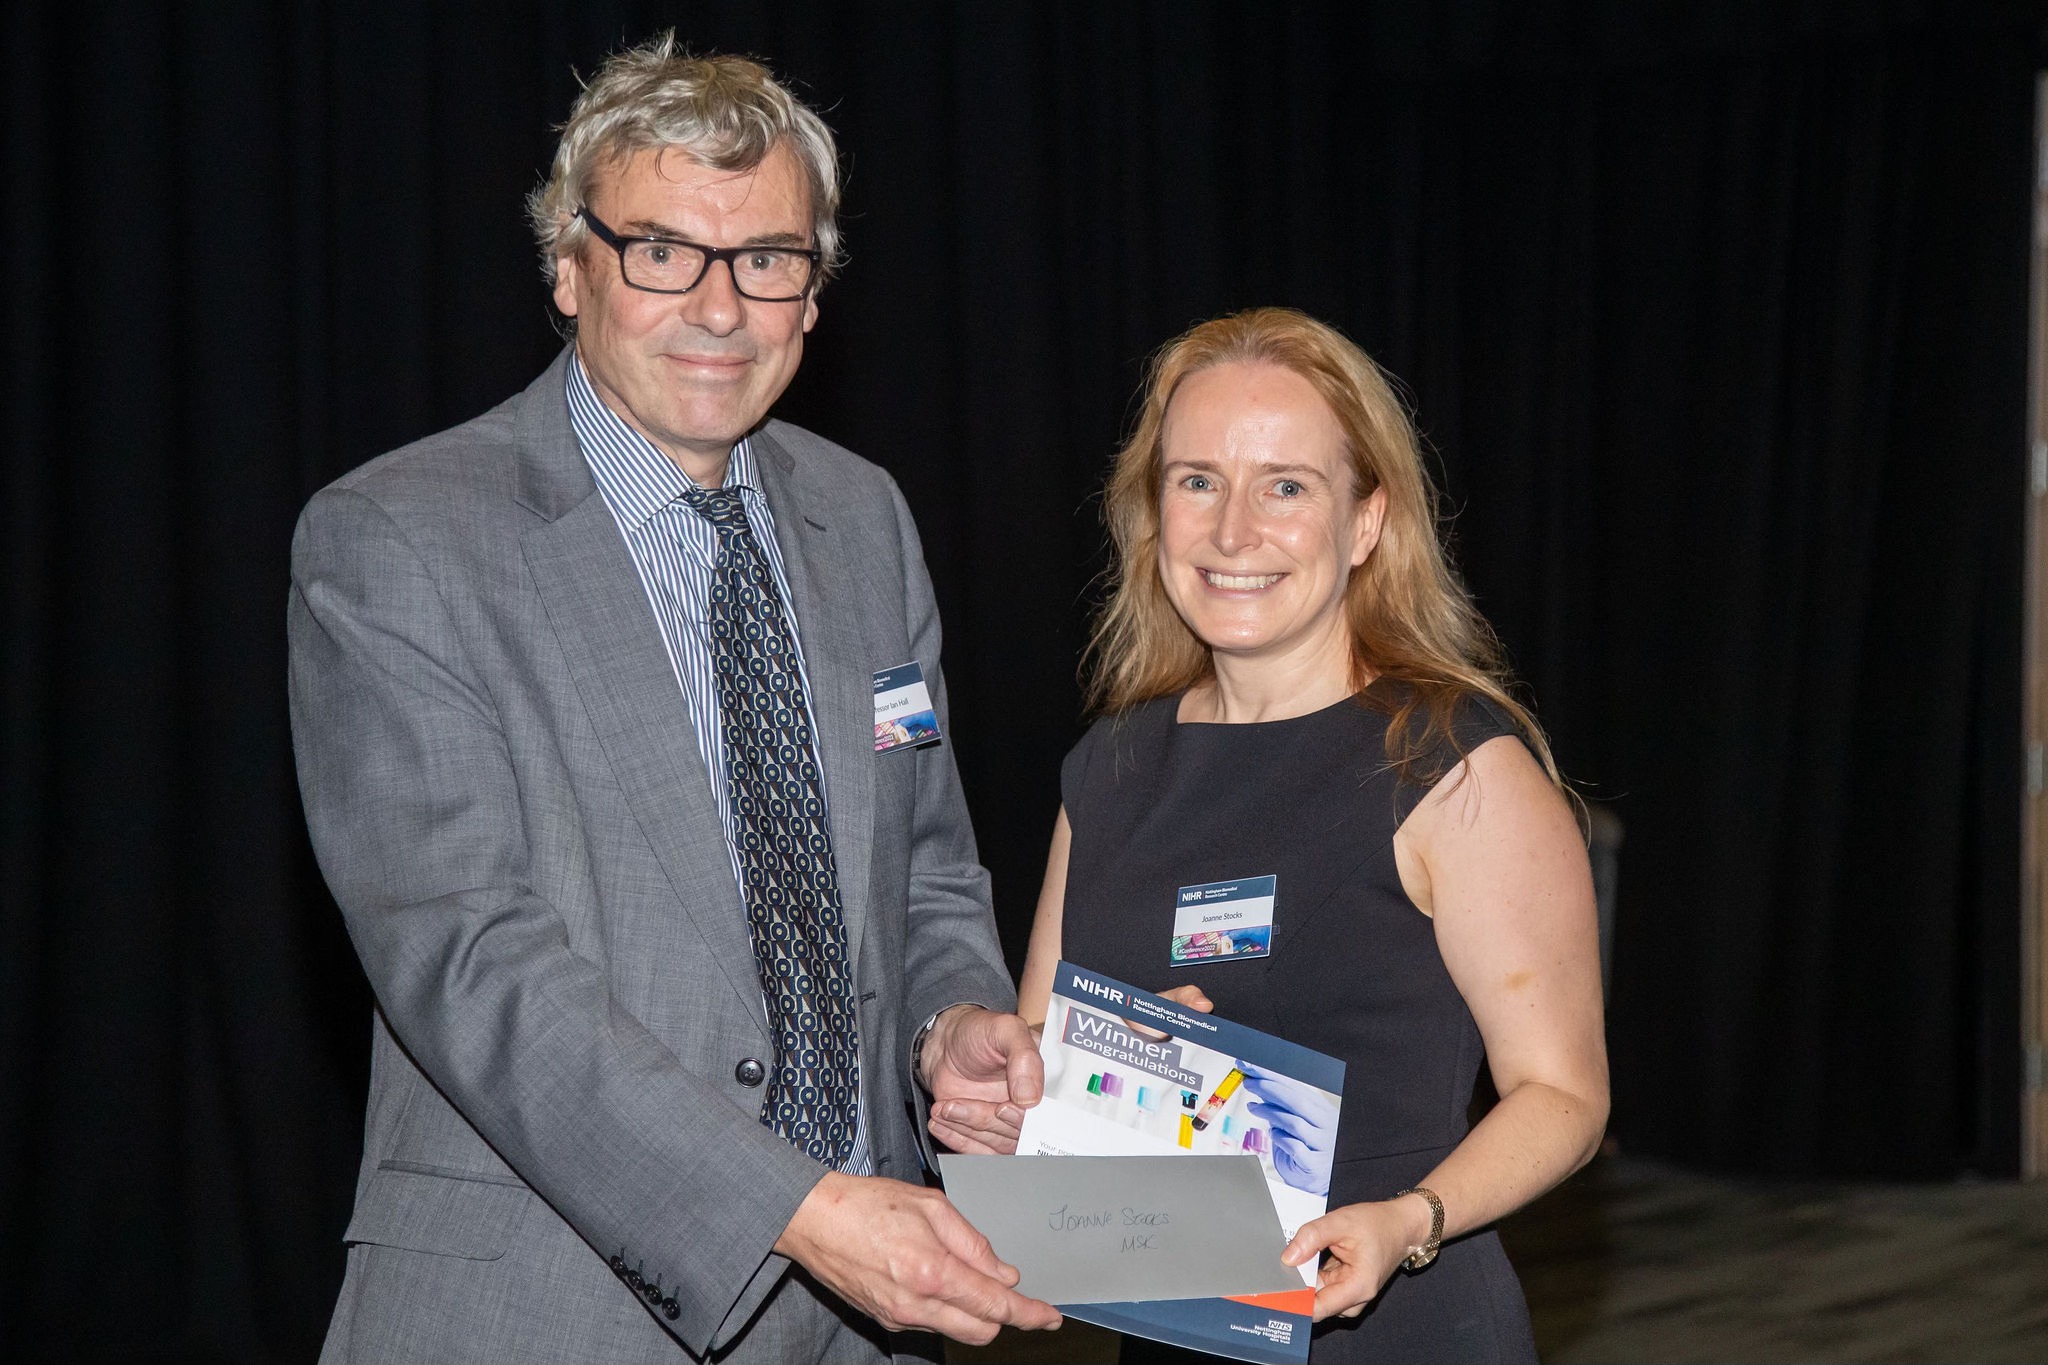 NIHR Nottingham BRC 2022 Conference Musculoskeletal poster competition winner Dr Joanne Stocks with Director of the Nottingham Biomedical Research Centre, Prof Ian Hall.